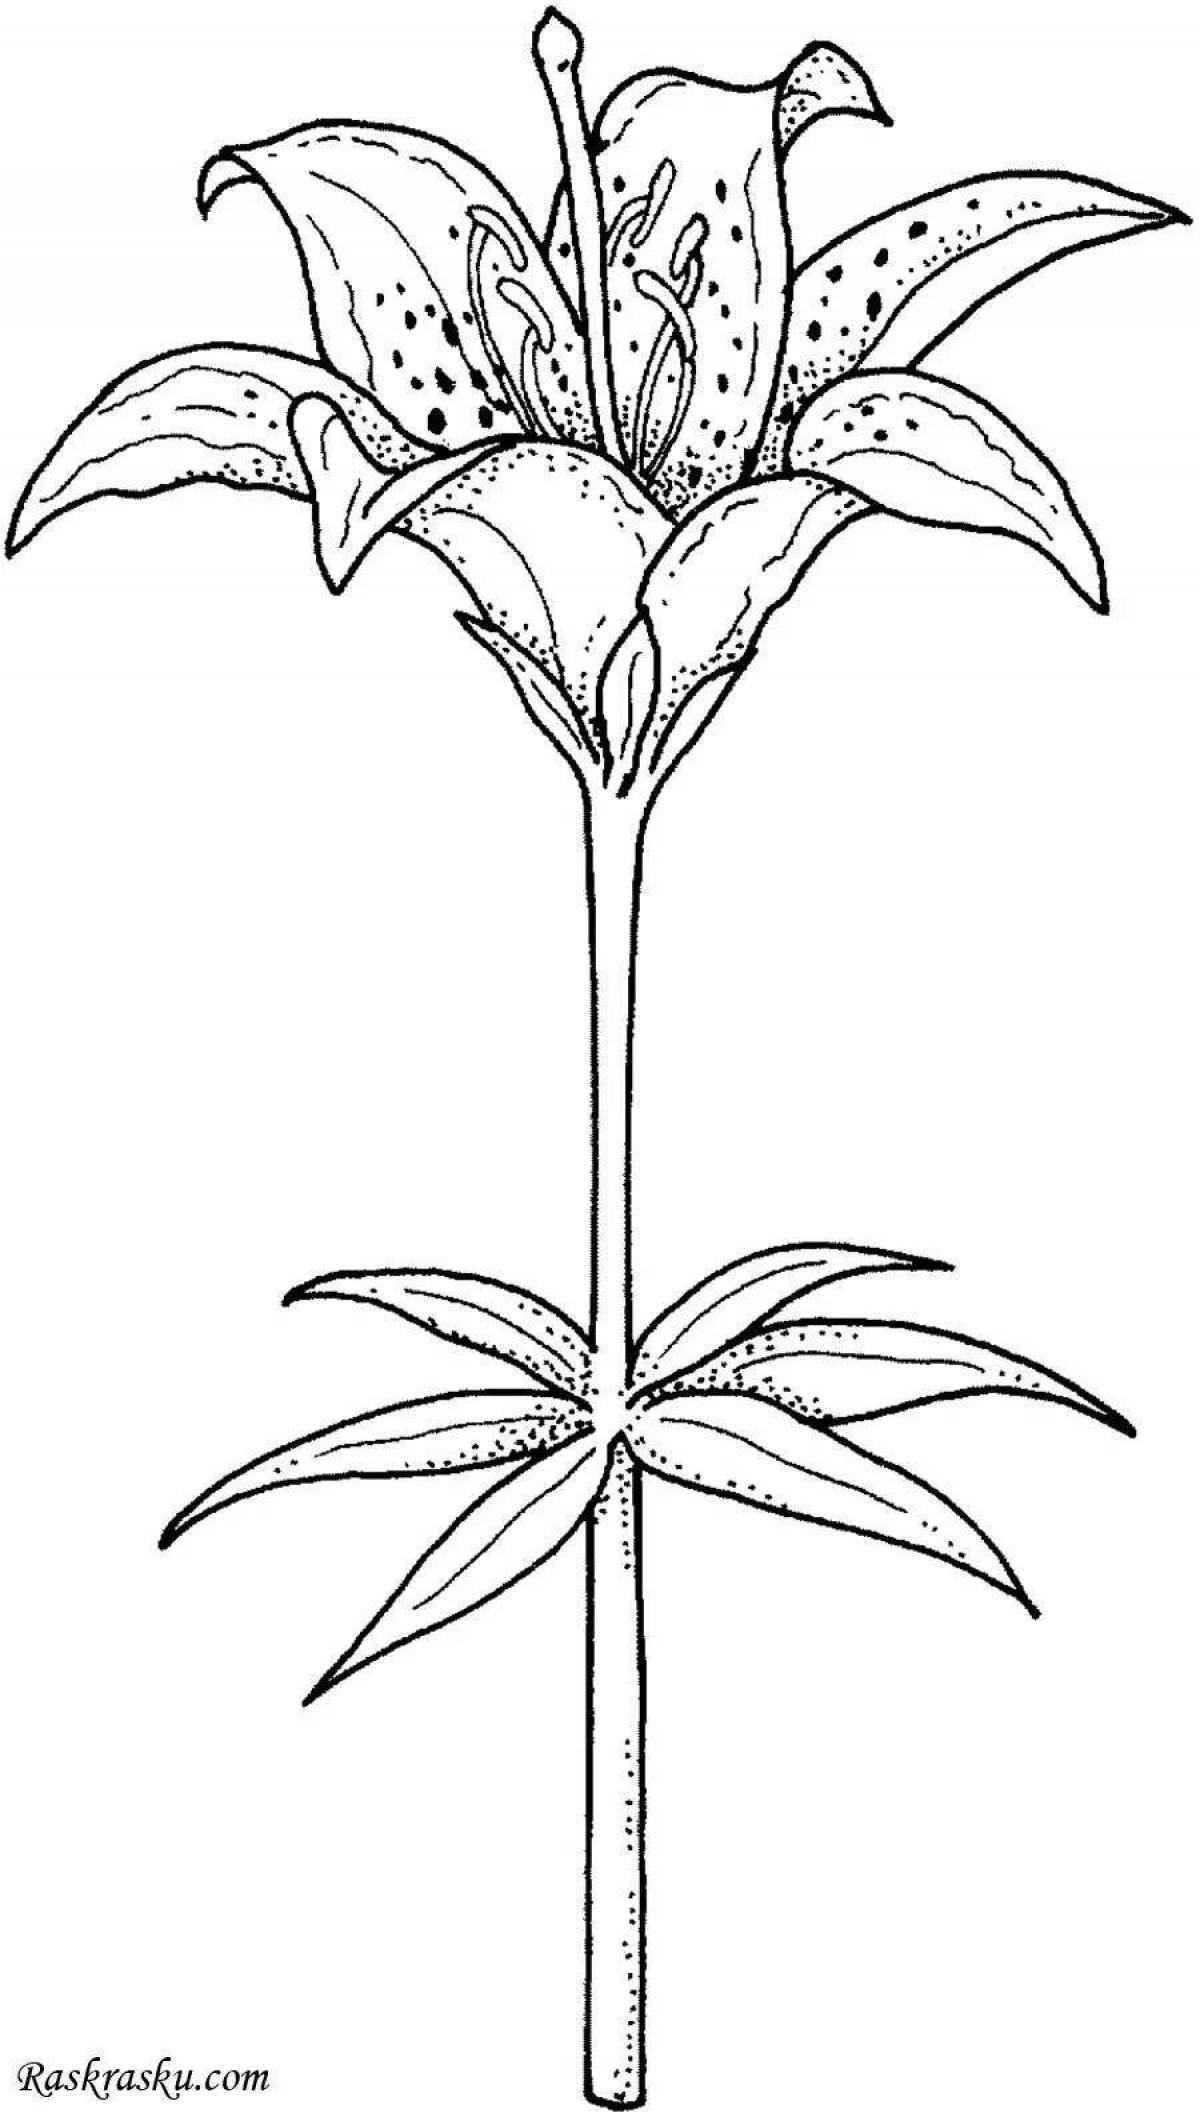 Violent lily coloring pages for kids